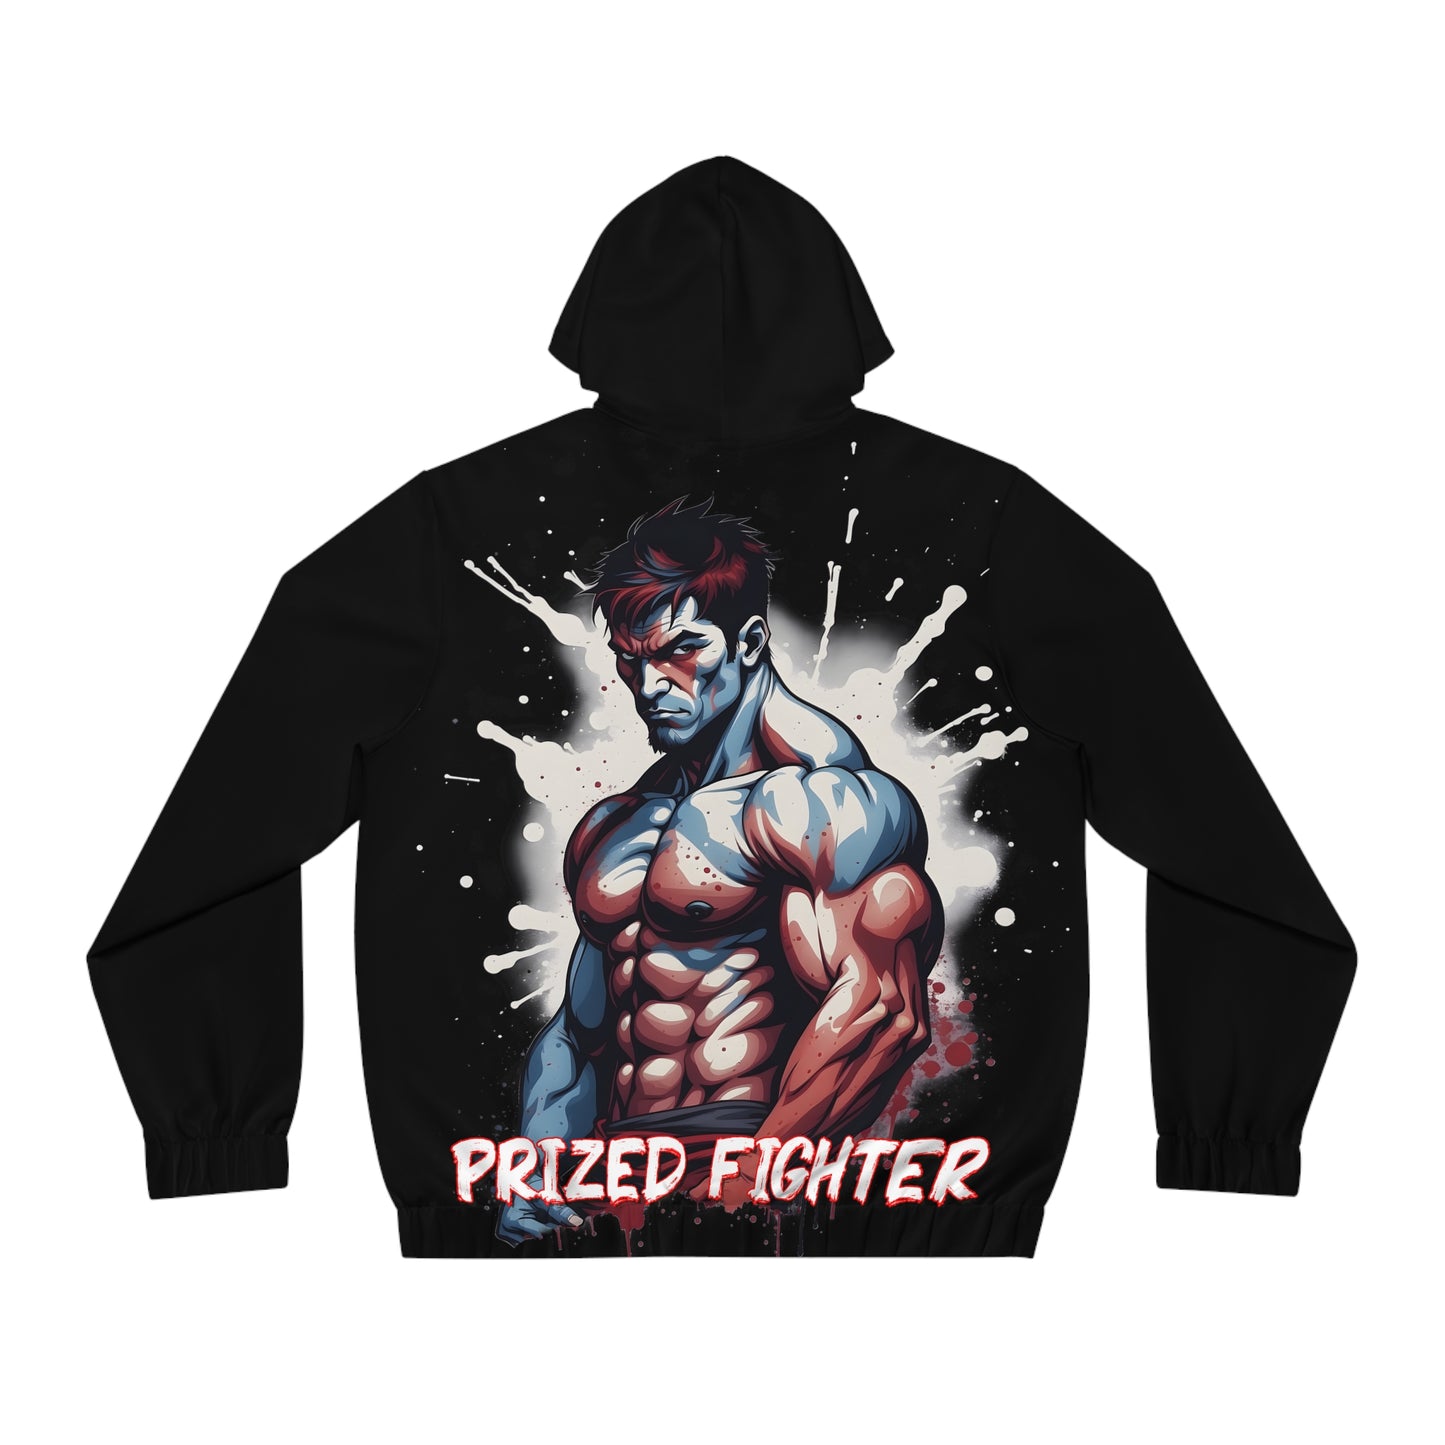 Kǎtōng Piàn - Prized Fighter Collection - America - 005 - Men's Full-Zip Hoodie